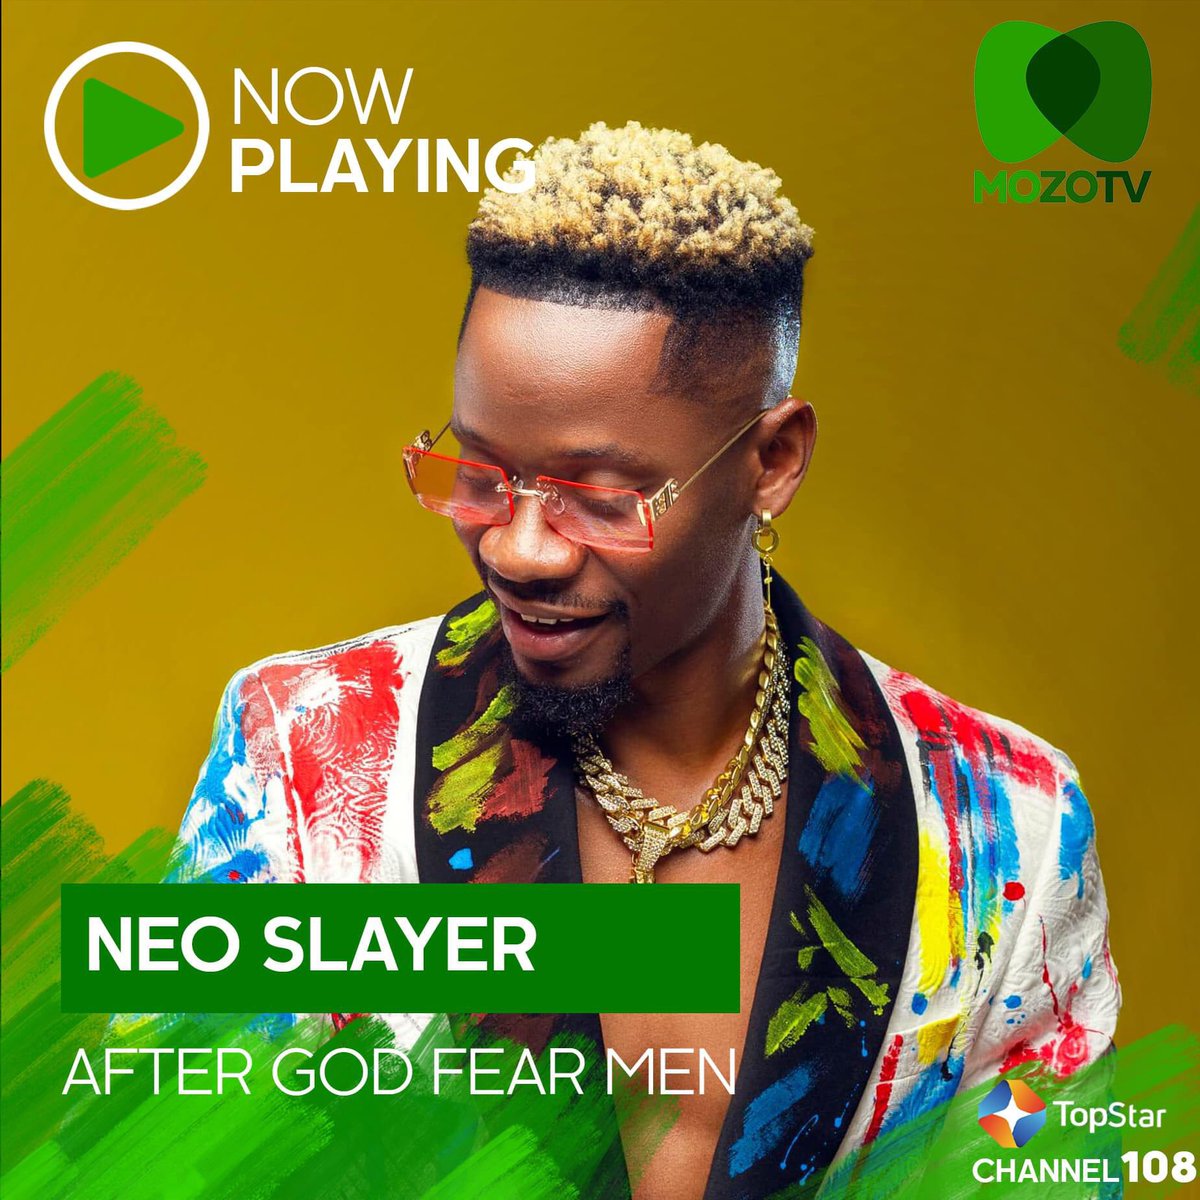 New music , new vibes!💃🏽 Neo Slayer- After God Fear Men is now playing on Mozo TV.💚 Tune In Now! TopStar Channel 108 and 544 on DTH (Dish)💚 Also, install the Startimes APP via the link below 👇🏾: play.google.com/store/apps/det…... #ARefreshingExperience #NowPlaying